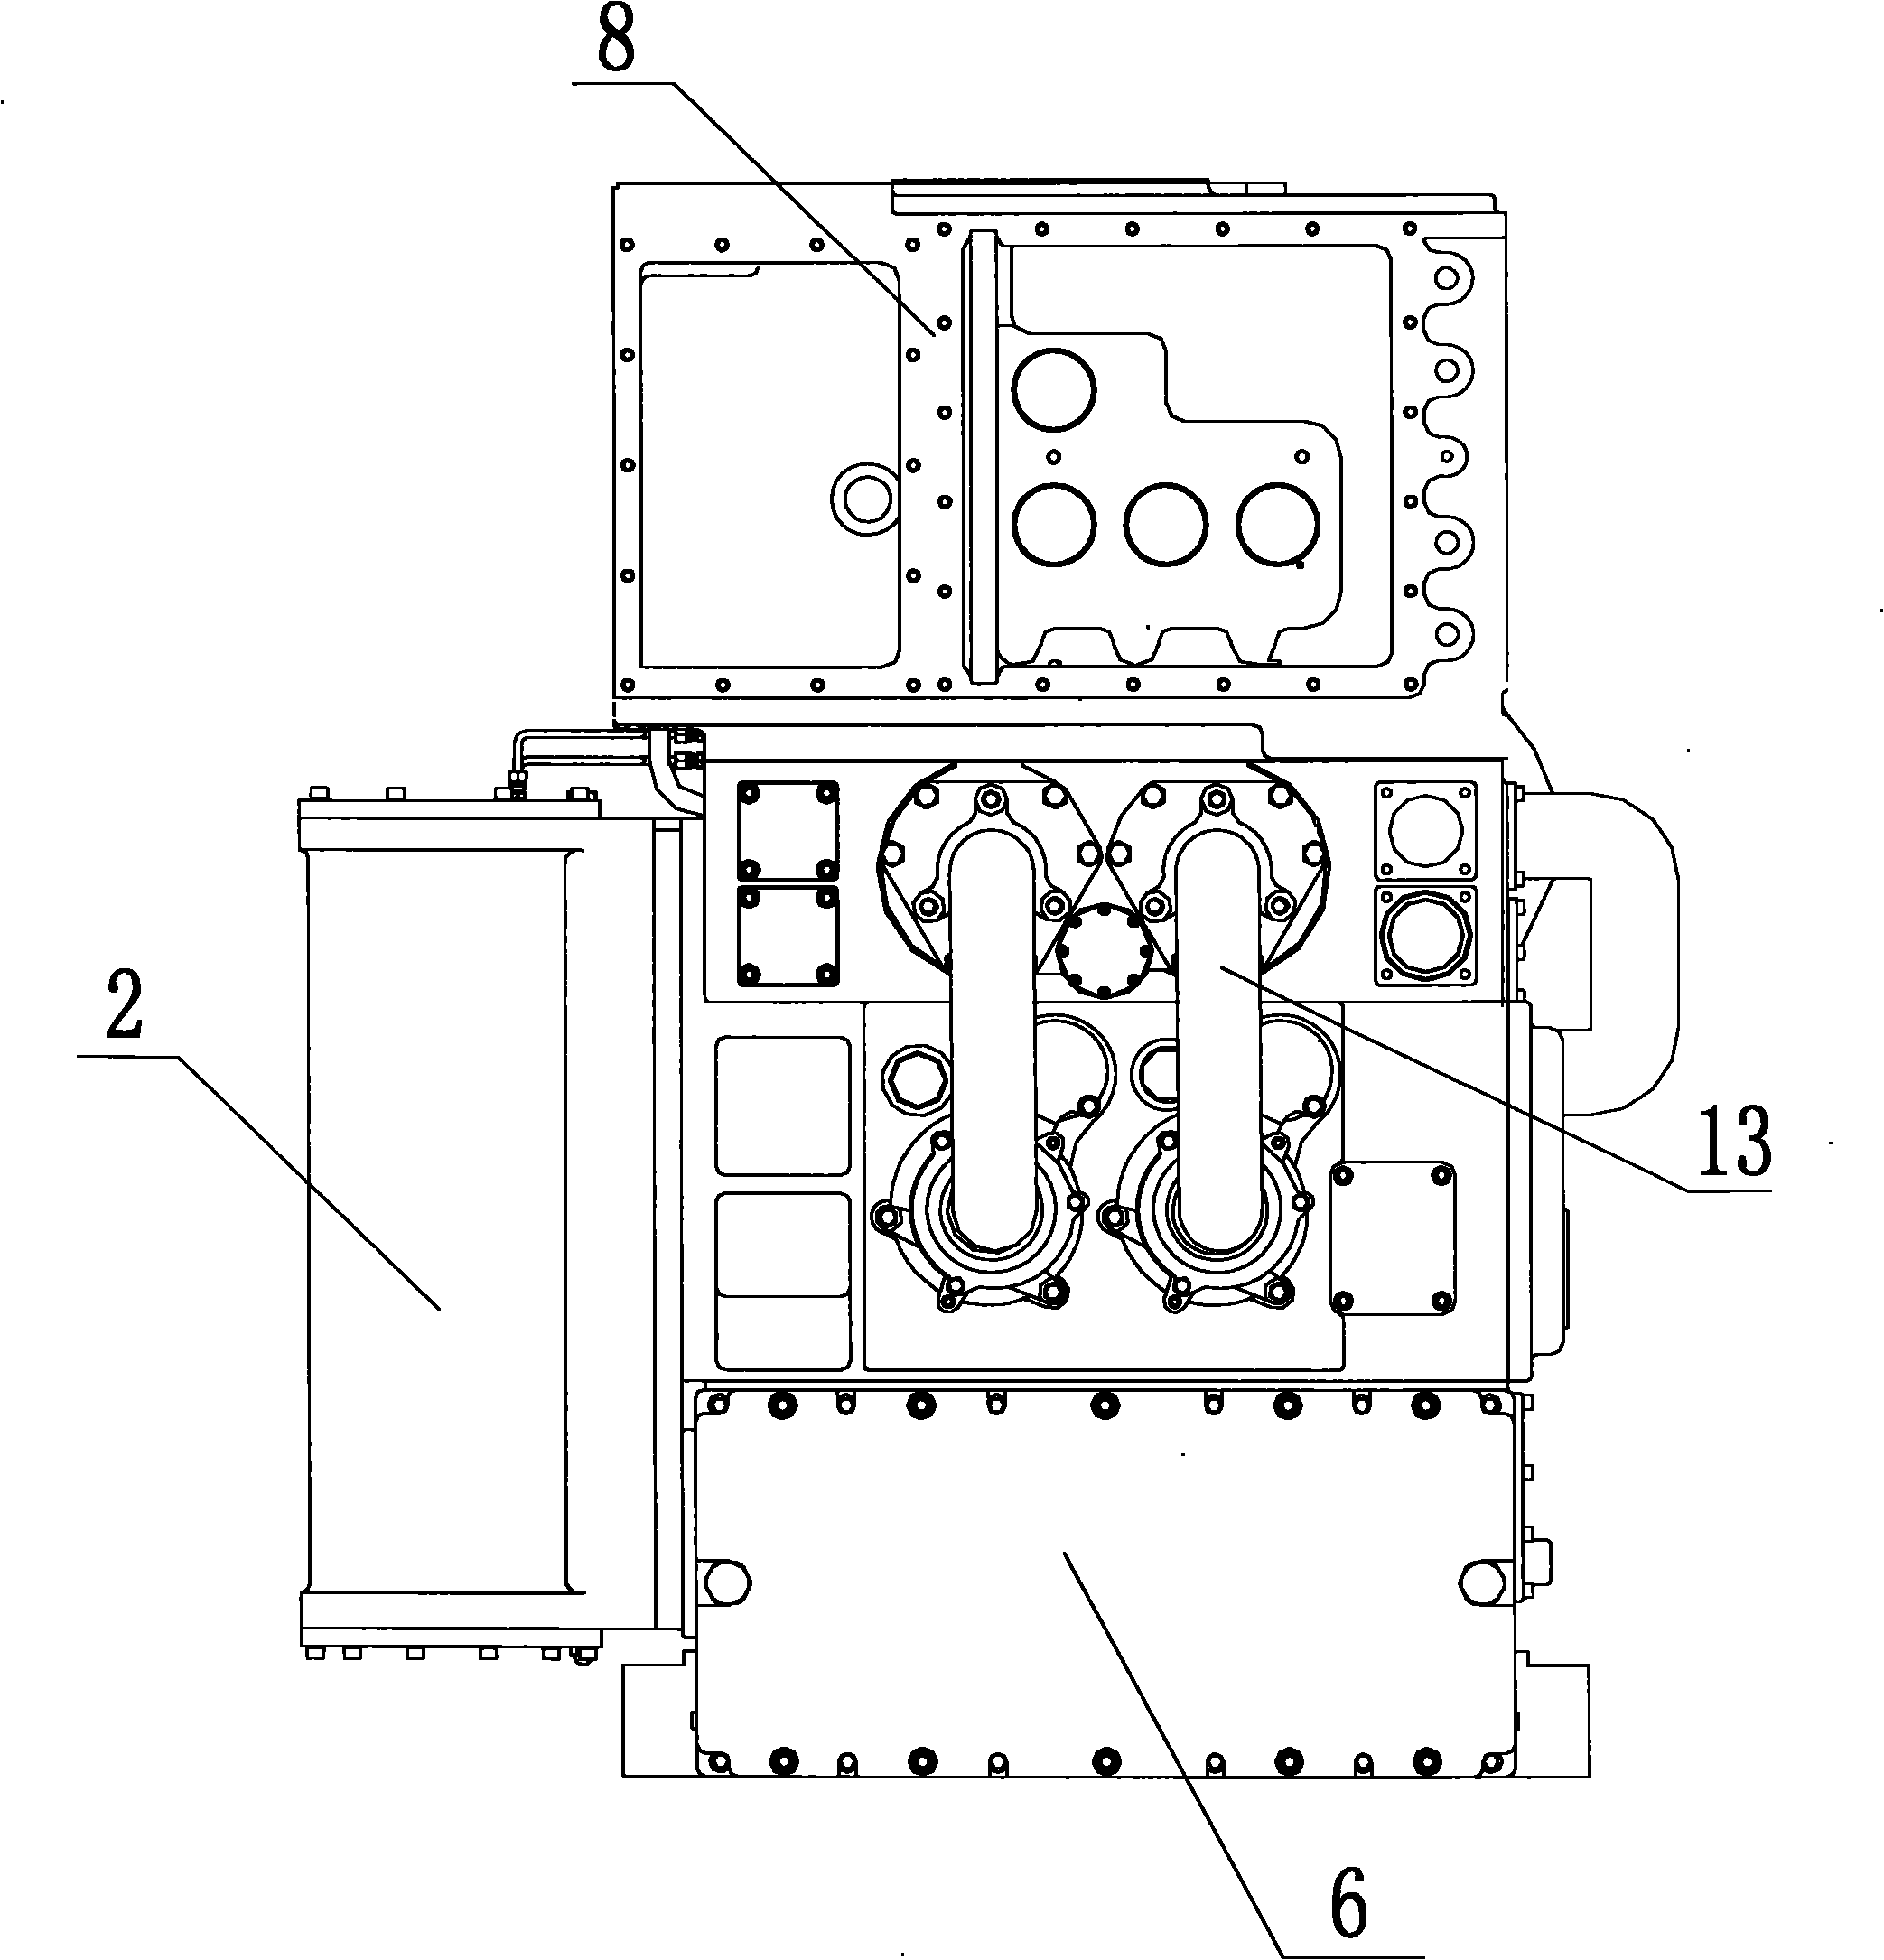 Auxiliary system for diesel engine